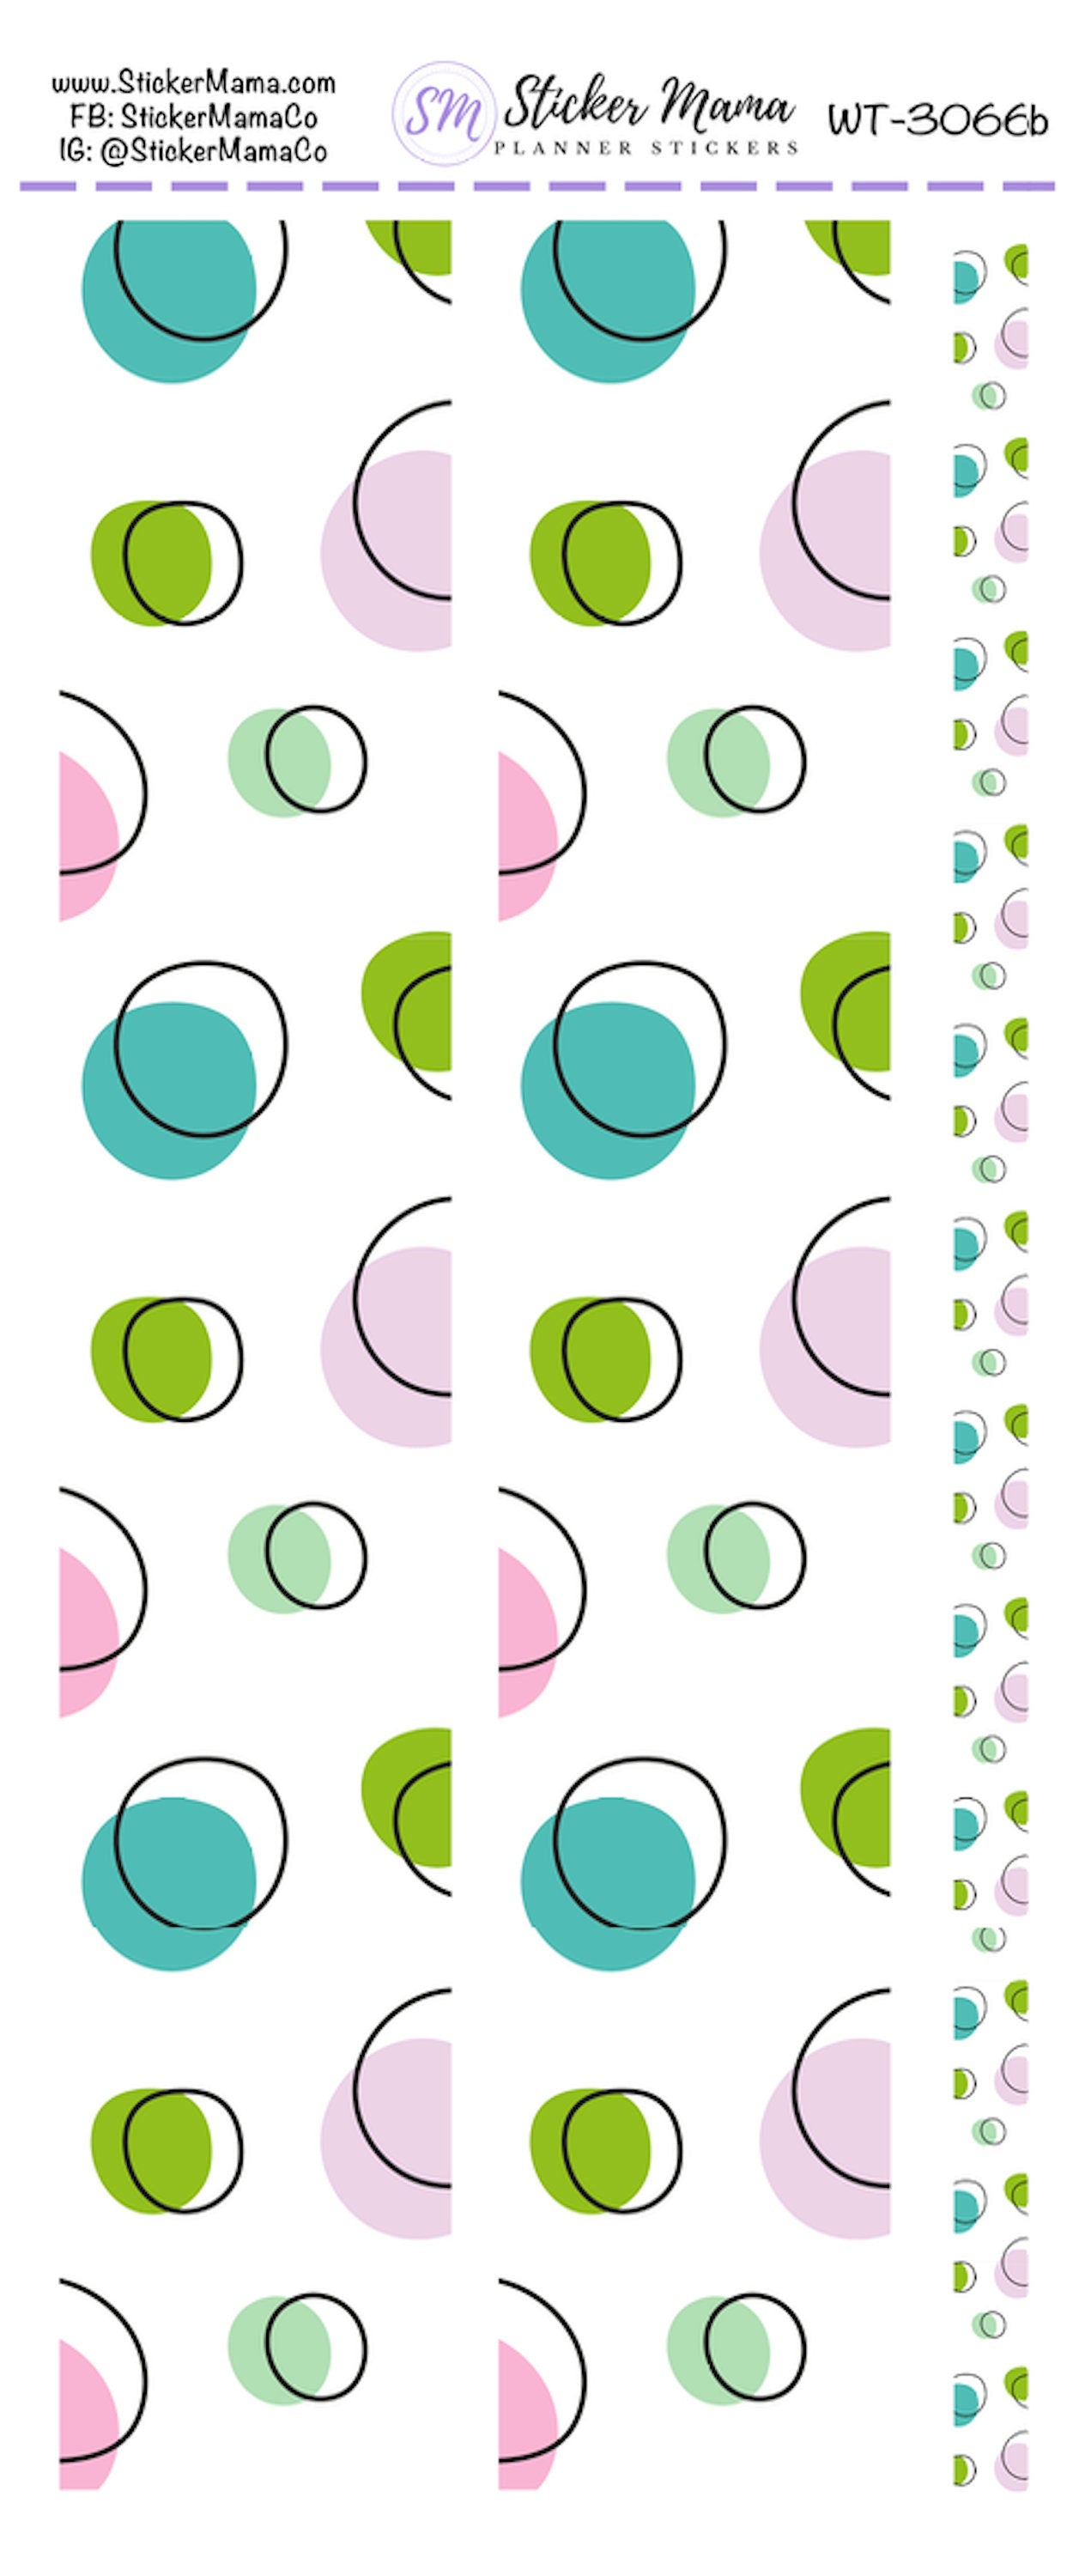 W-3066 - WASHI STICKERS - Spring Floral - Planner Stickers - Washi for Planners